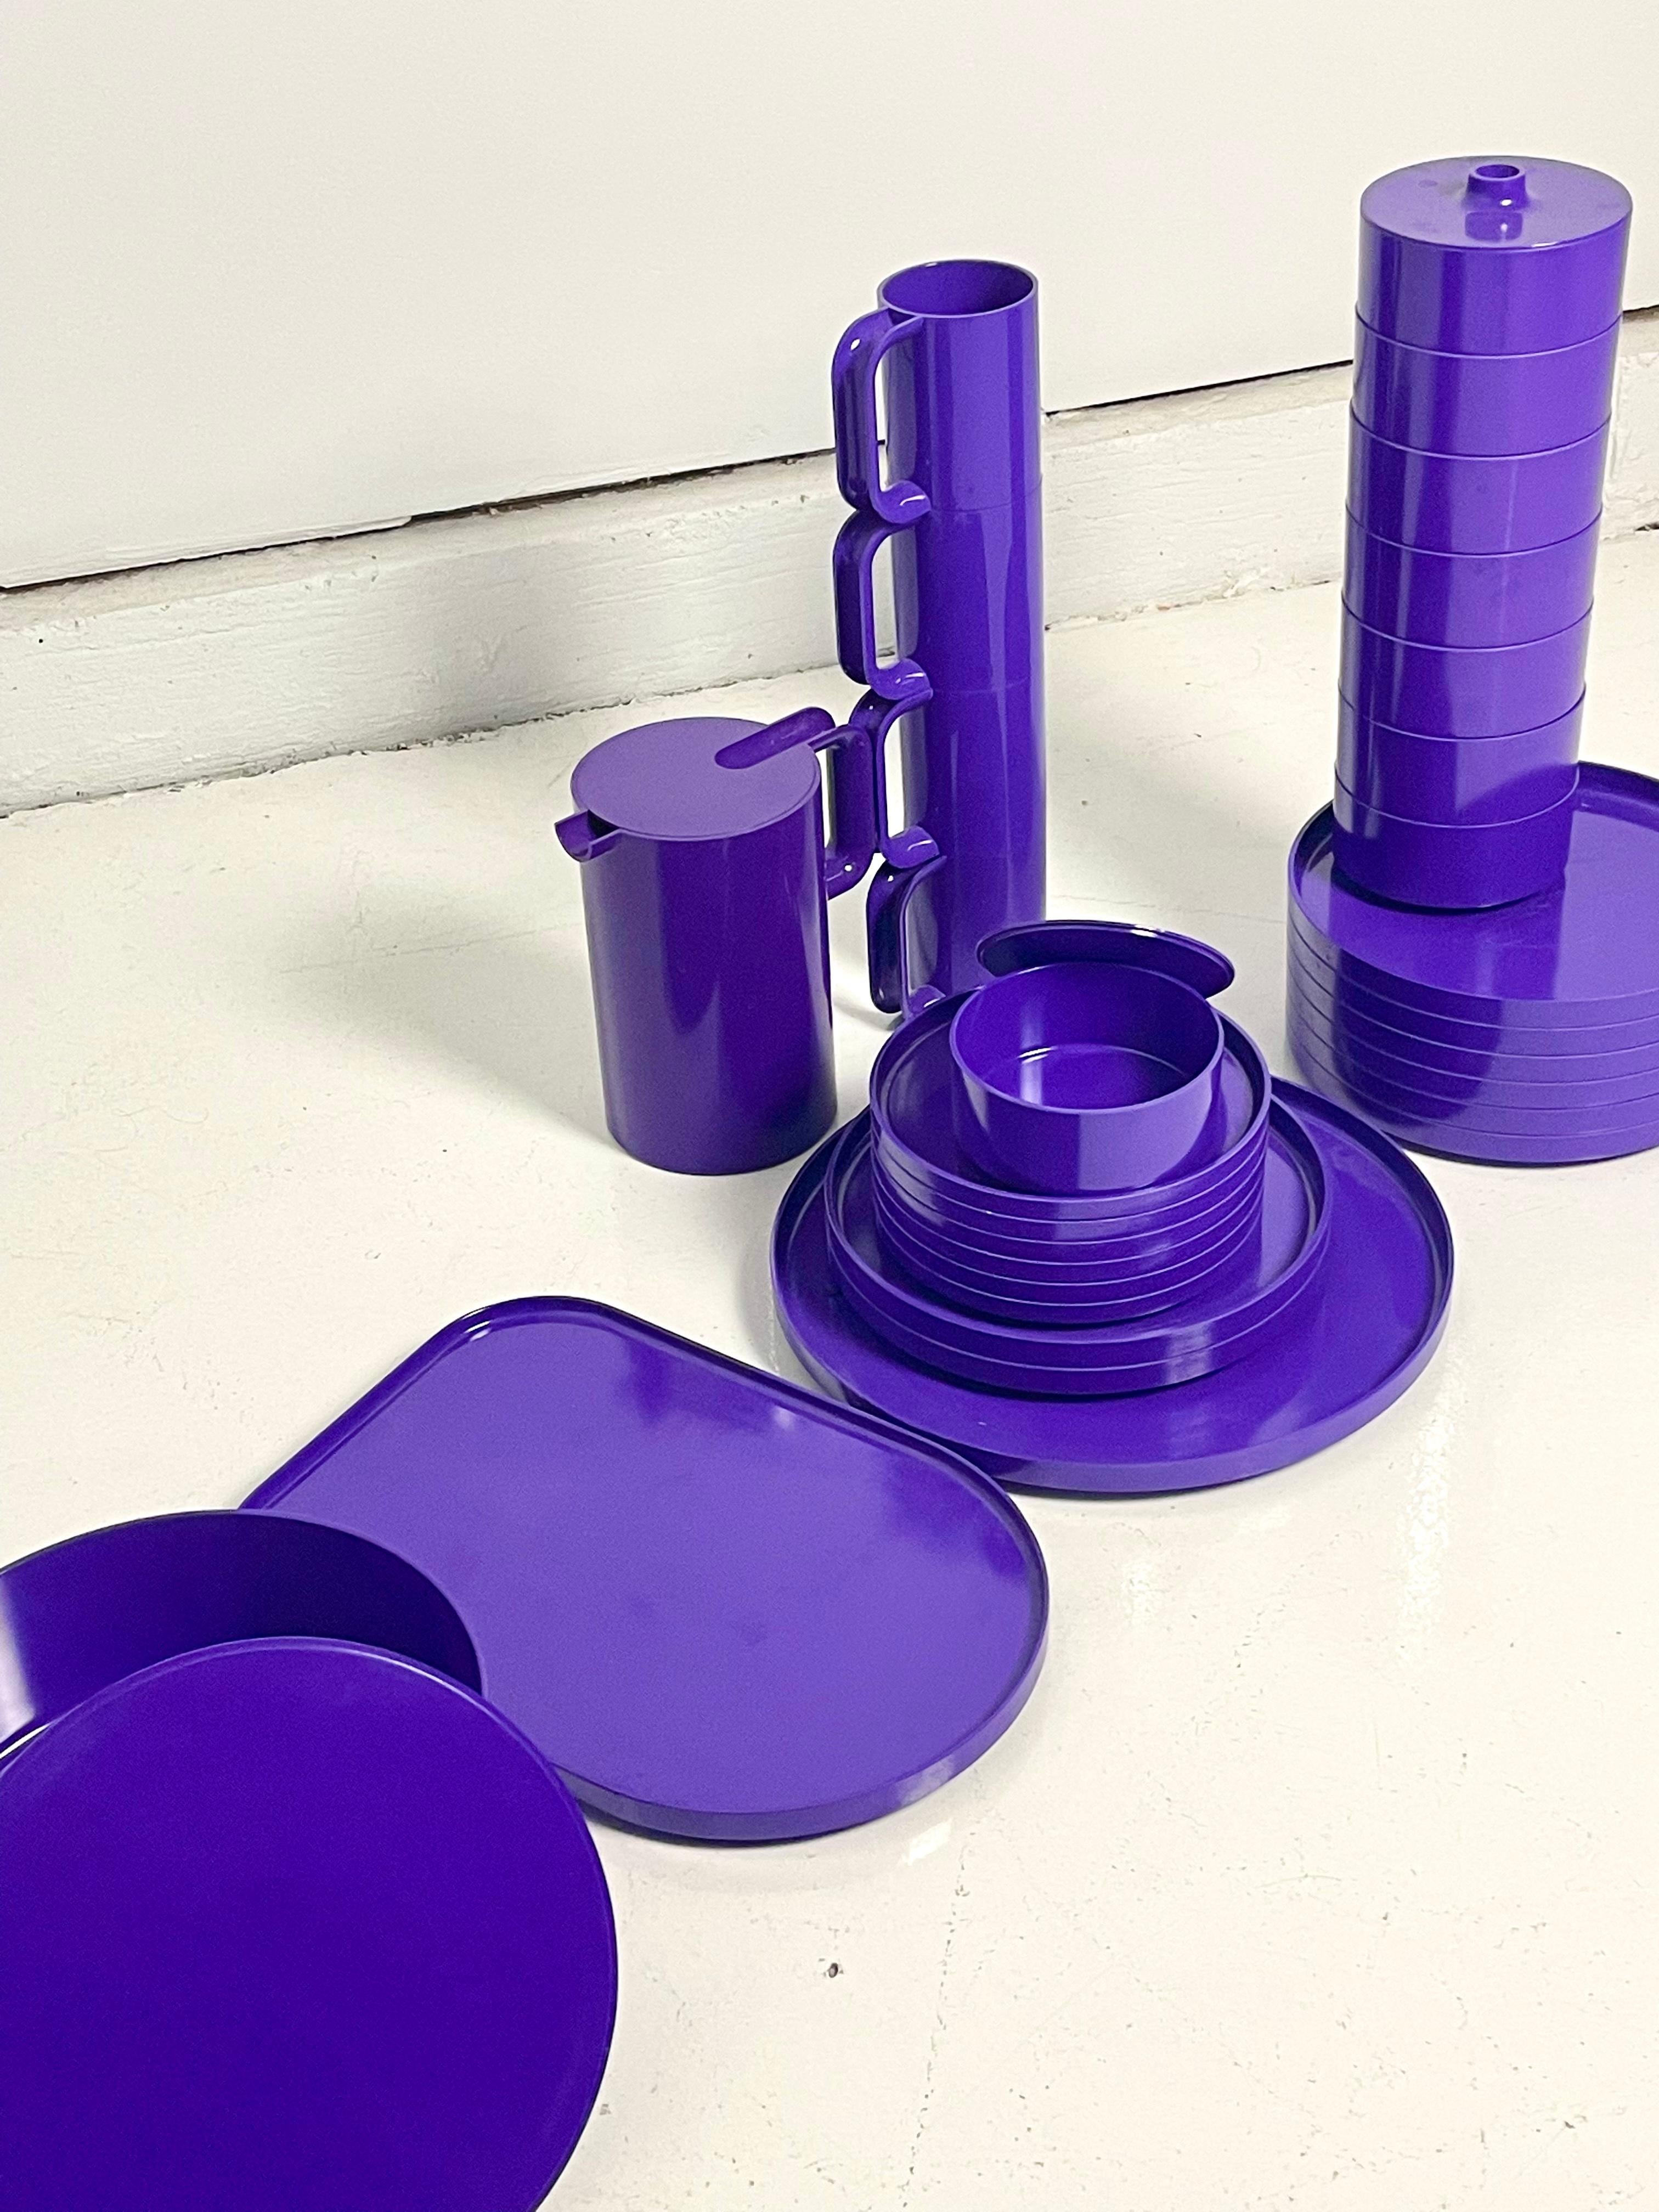 33 Piece stackable dinnerware setup by Massimo Vignelli for Heller, 1964 in a vibrant, and rare, purple plastic. Impeccable space saving design gives this versatile set endless possibilities. Pink set also available.